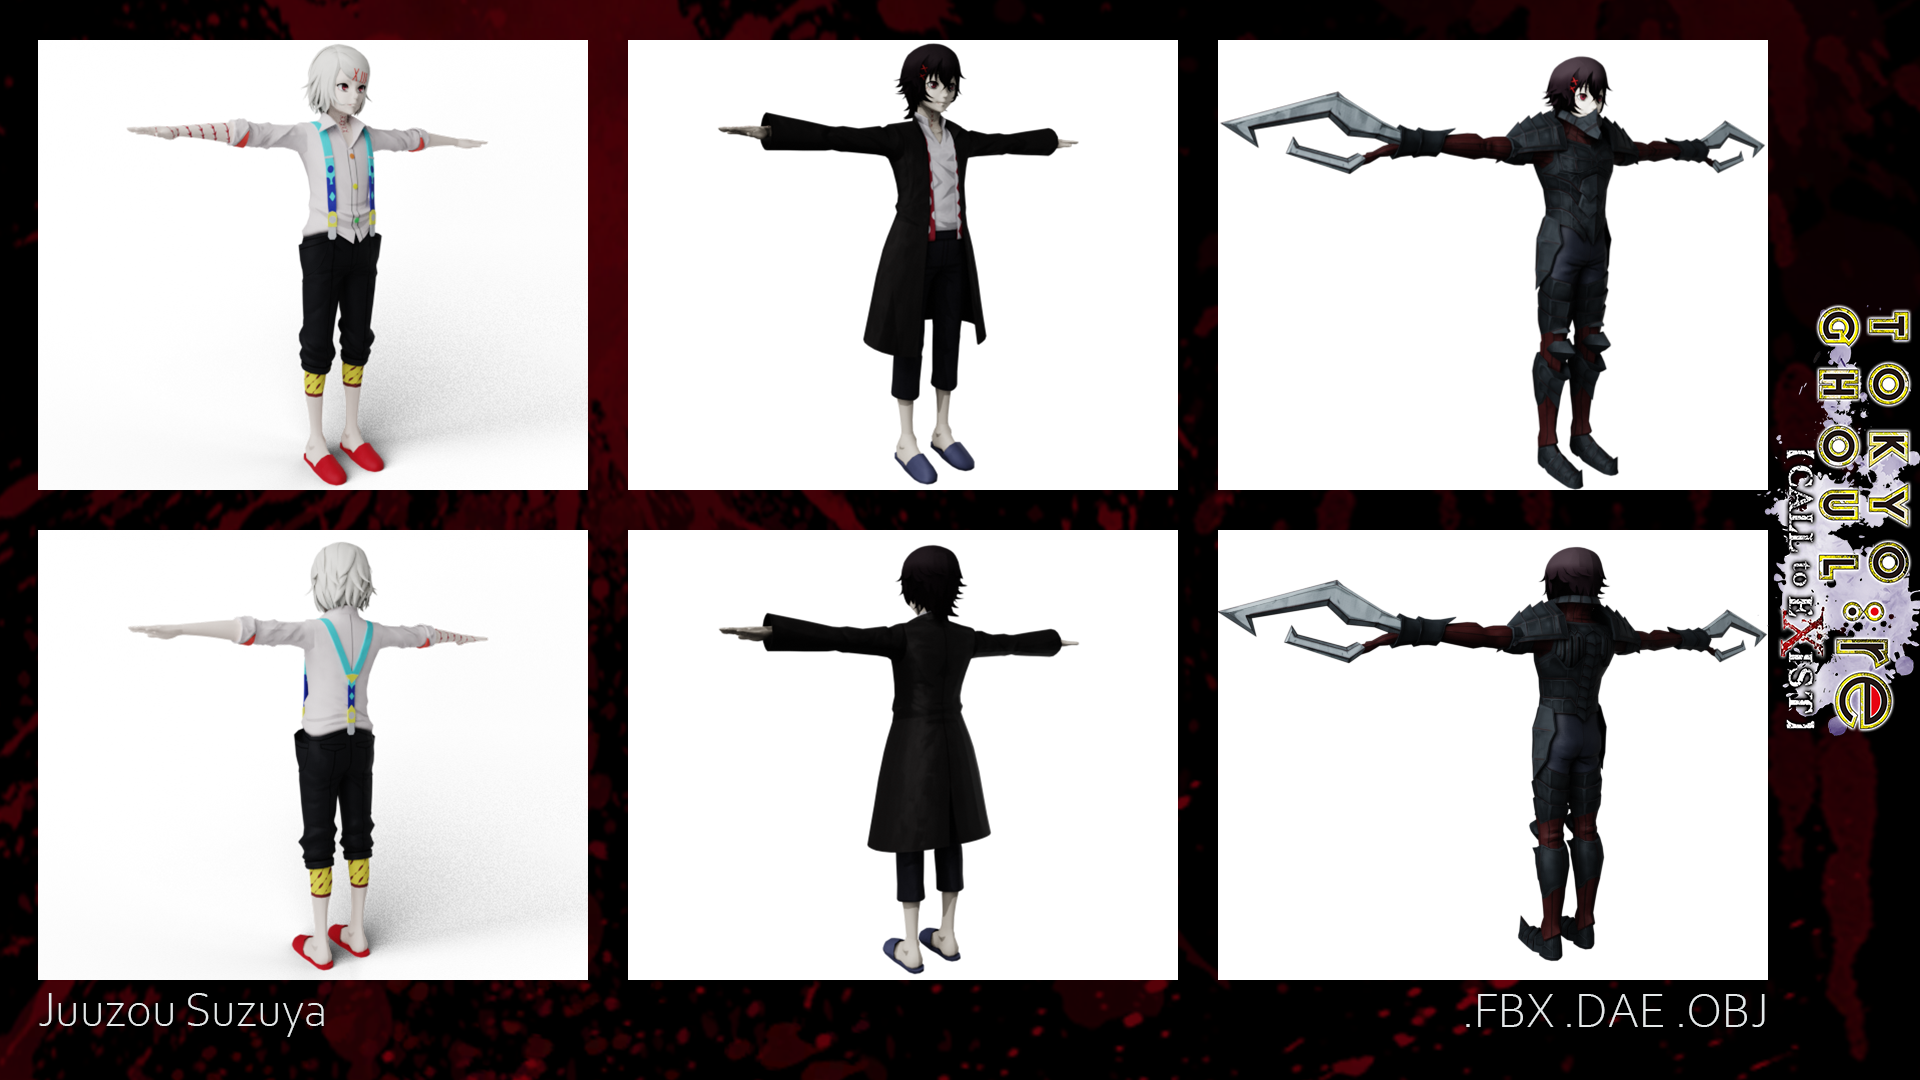 TOKYO GHOUL:RE CALL TO EXIST